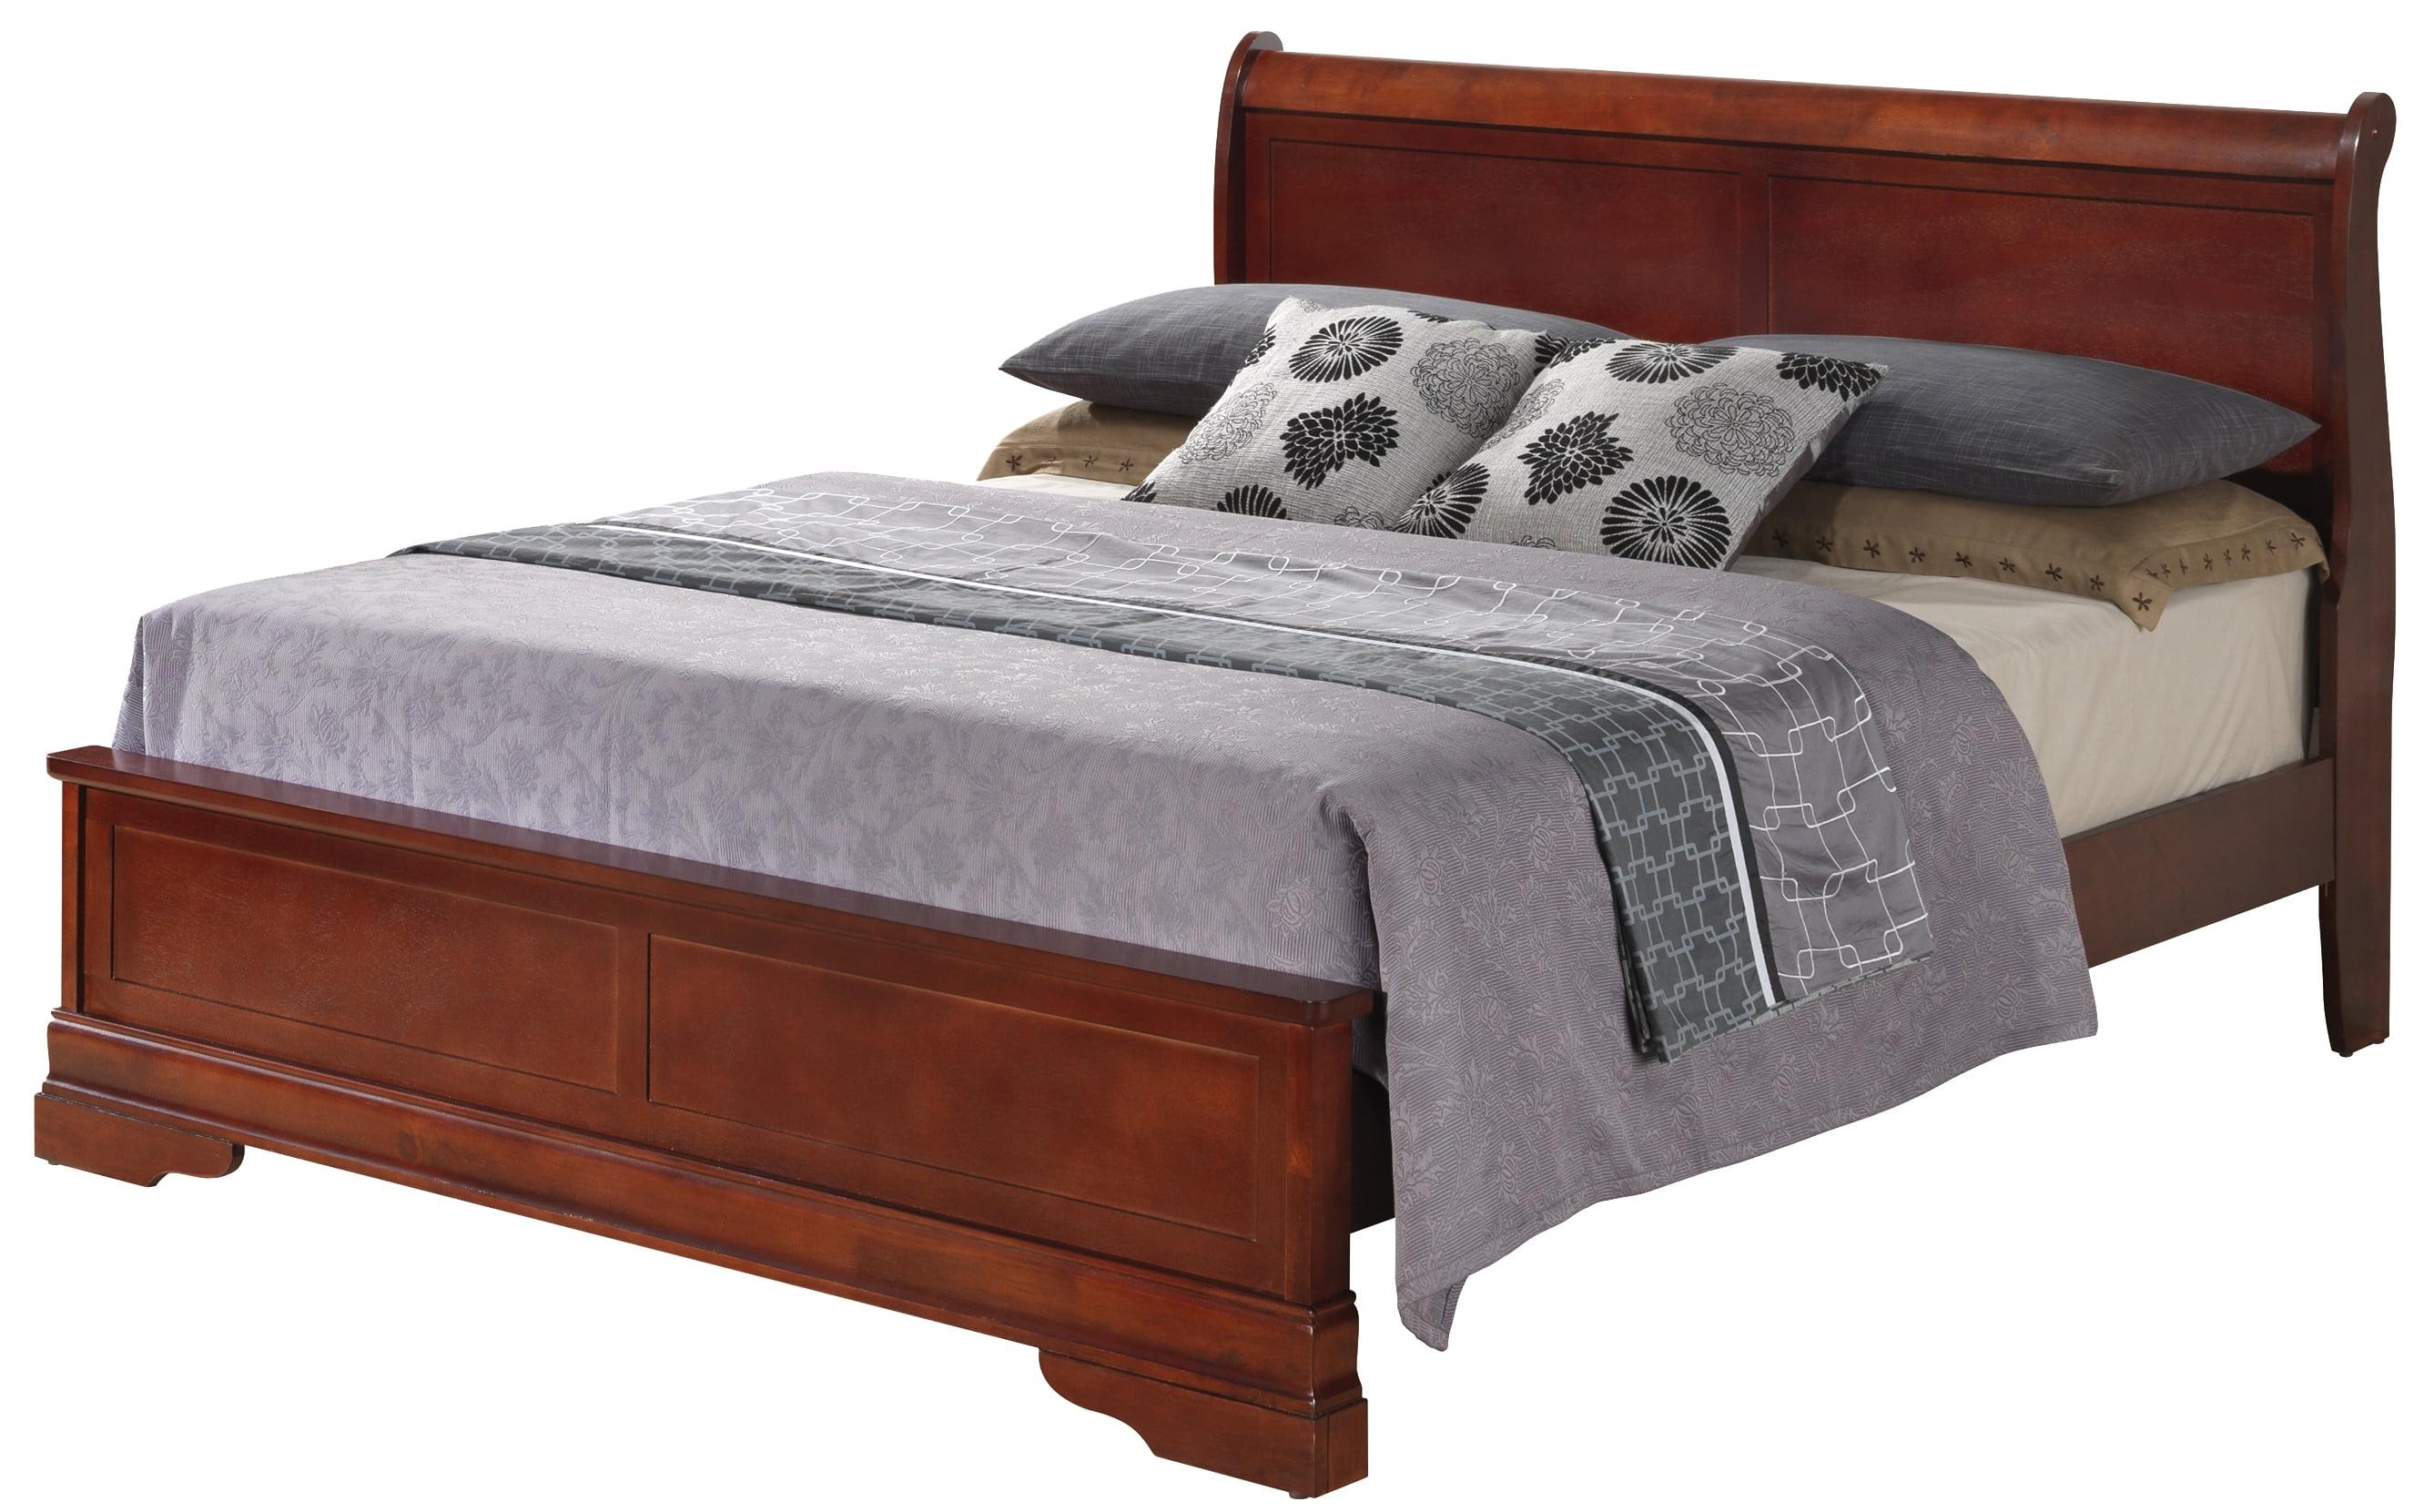 Classic Cherry Sleigh Queen Bed with Storage Drawers and Wood Headboard